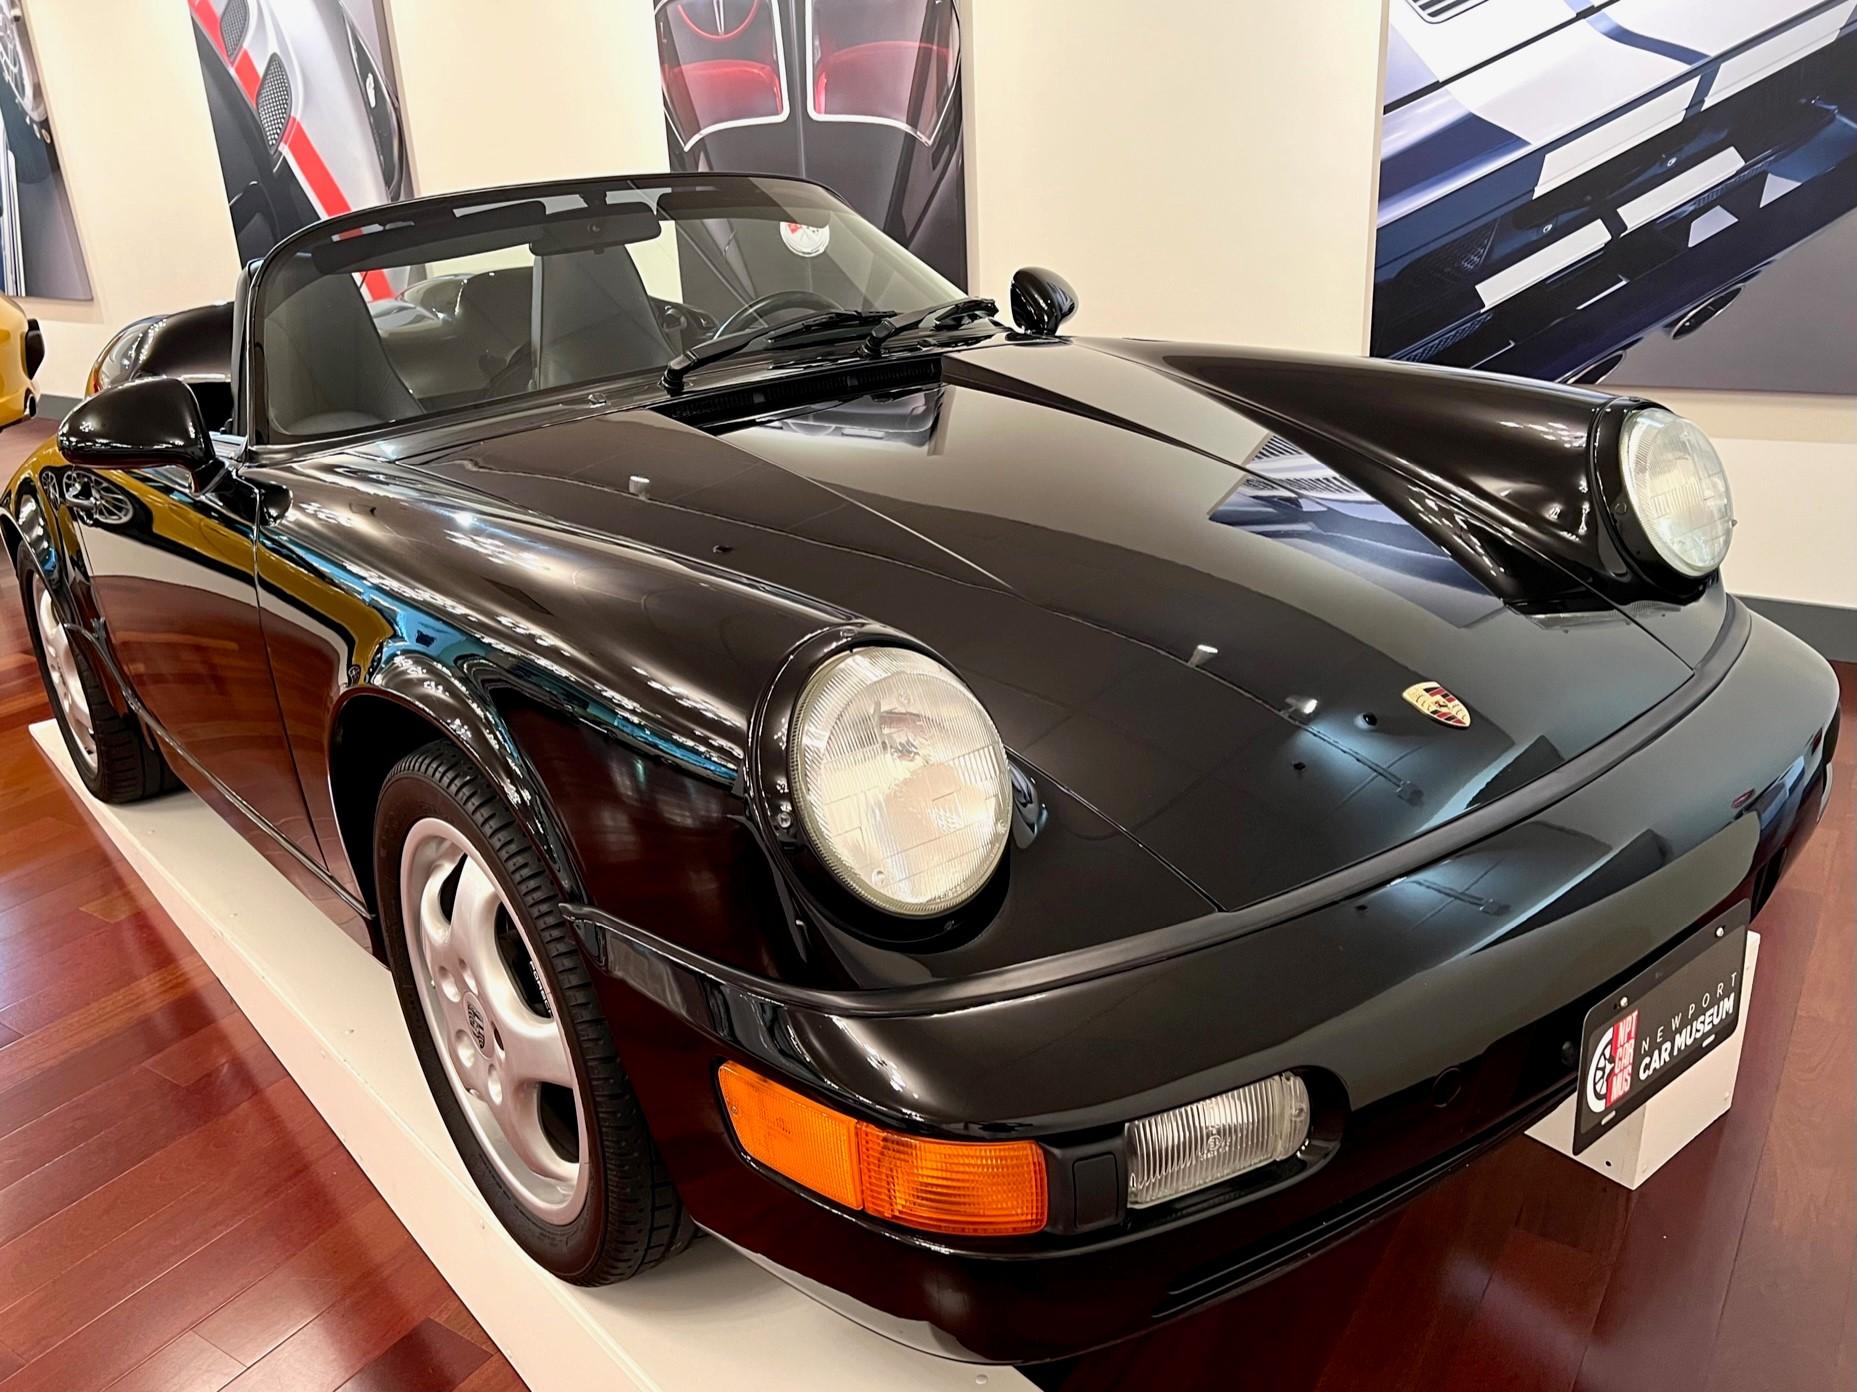 Daily Briefing: Porsche Speedsters on display, Chattanooga Motorcar Festival's 